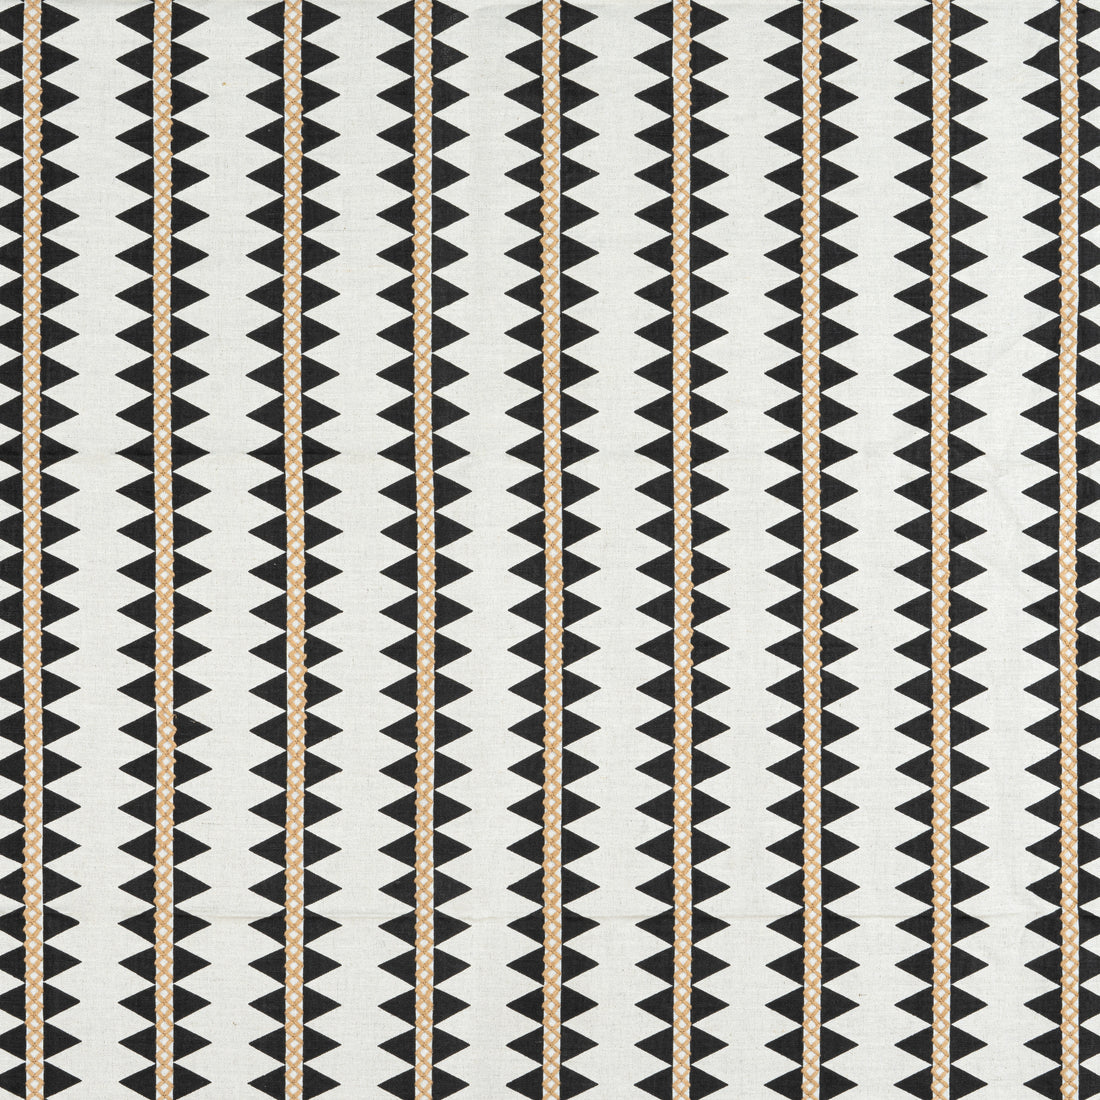 Reno Stripe Embroidery fabric in black color - pattern number W713240 - by Thibaut in the Mesa Fabrics collection